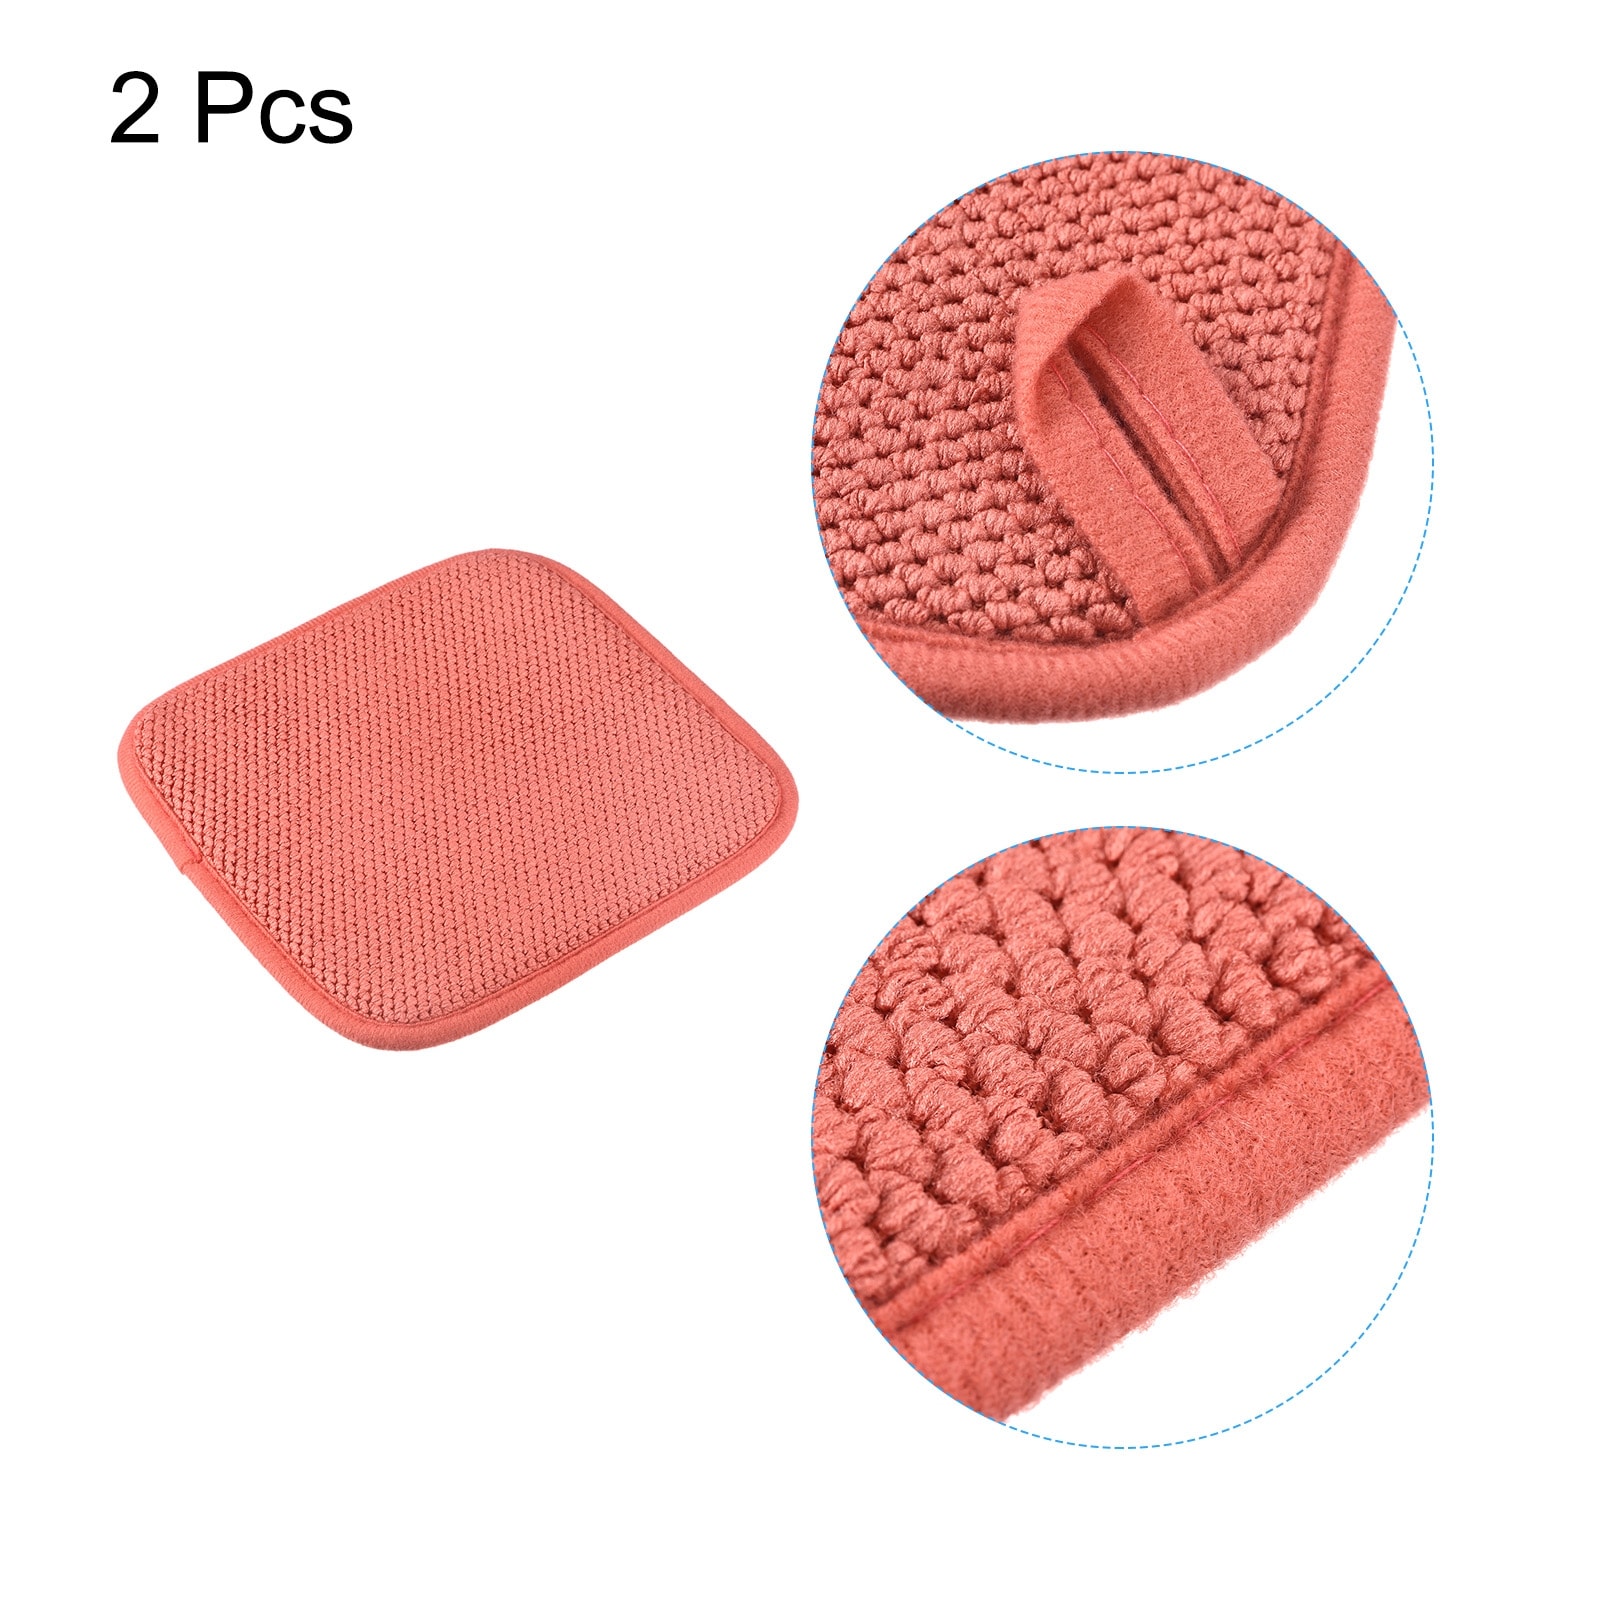 https://ak1.ostkcdn.com/images/products/is/images/direct/e84ff37c71440d5c99915c92deca69127398ca54/2pcs-Dish-Drying-Mat-Microfiber-Dishes-Drainer-Mats-Dish-Drying-Pad-Red.jpg